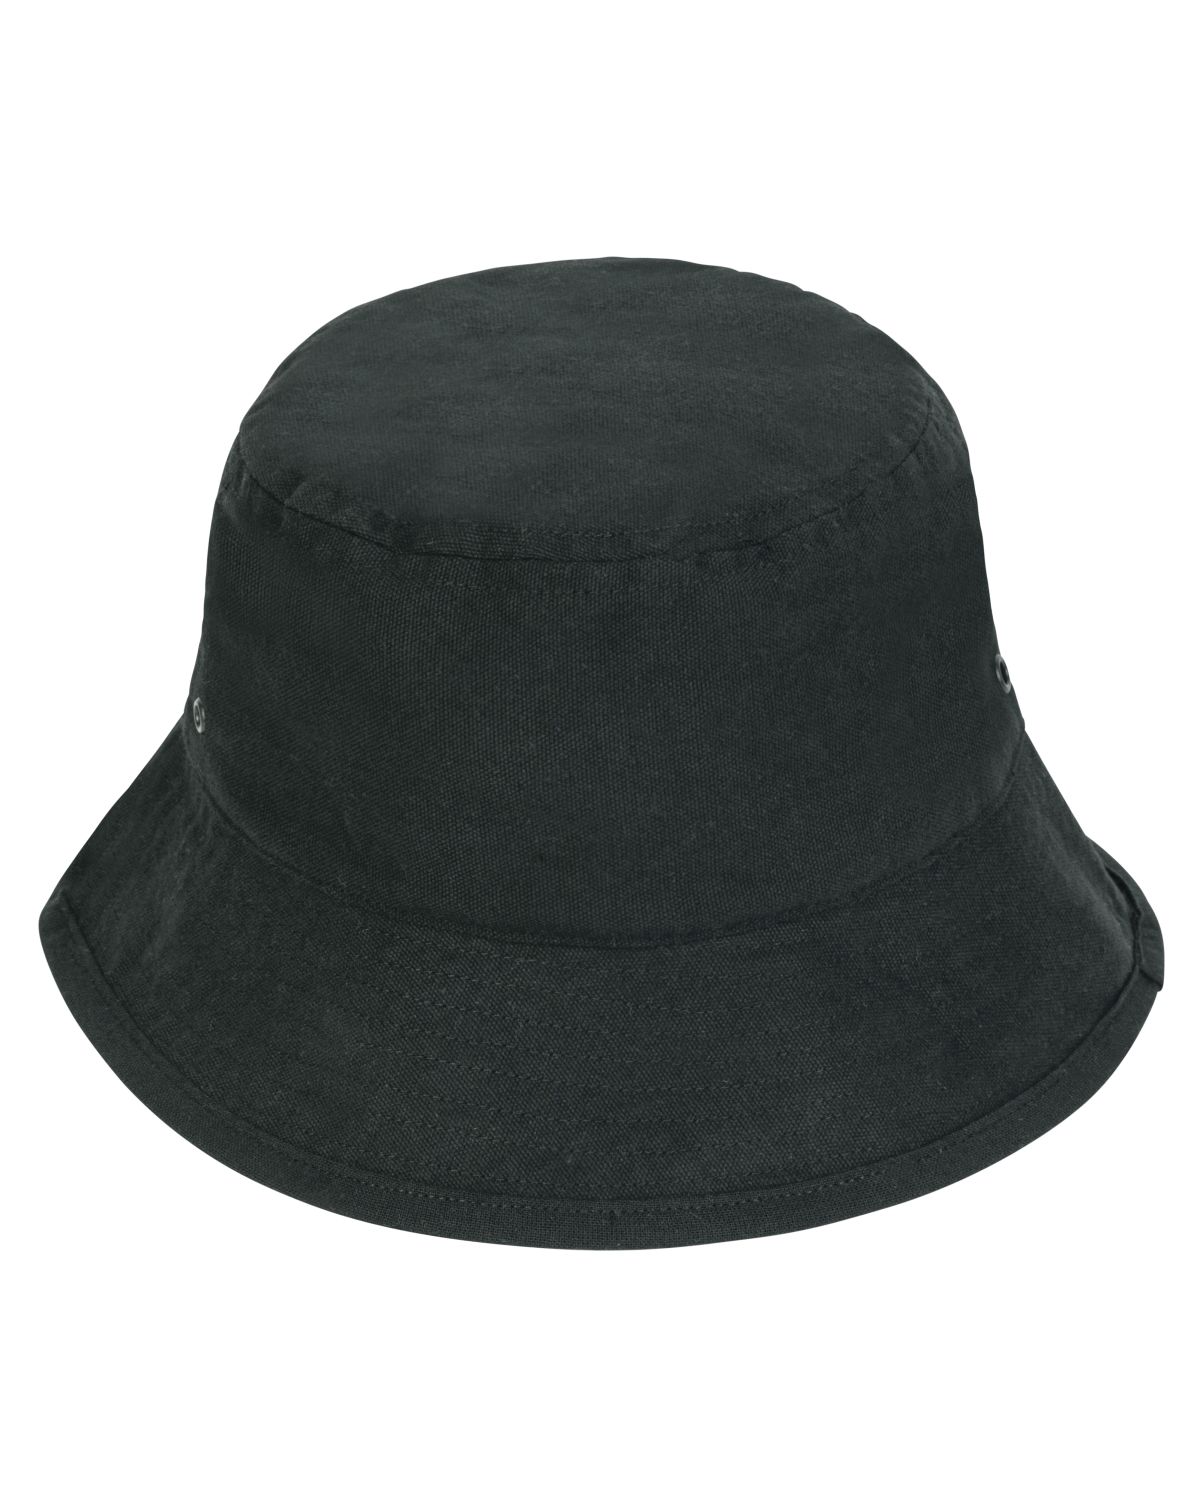 customize your own sustainable bucket hat